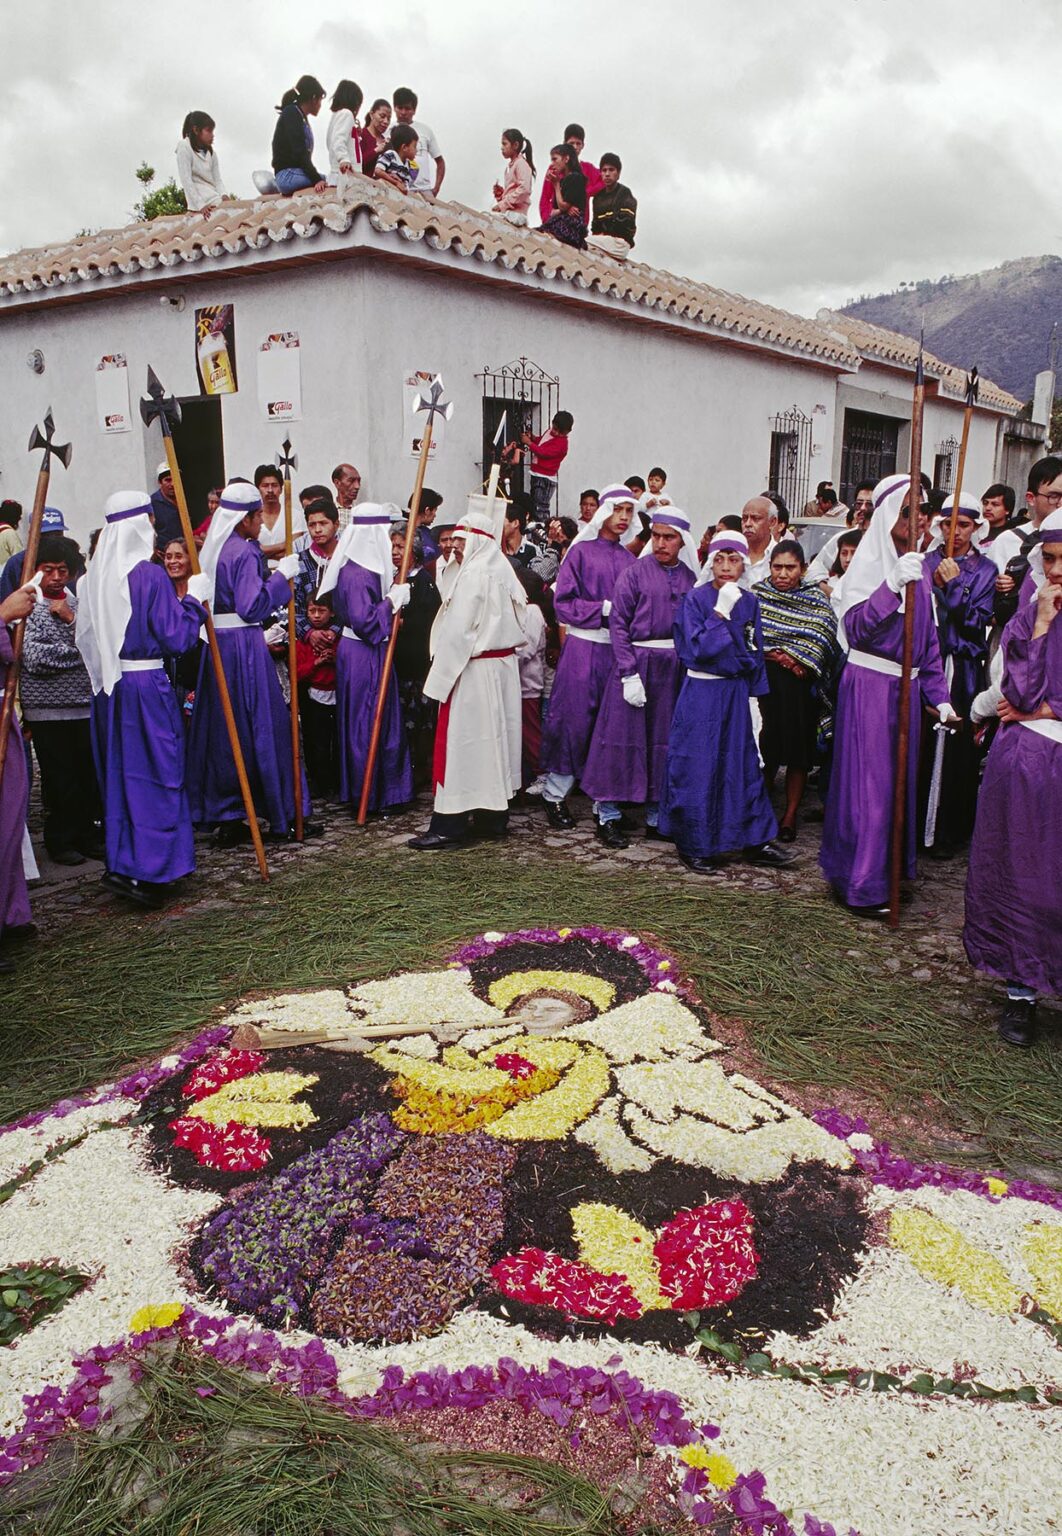 Purple-robed PENITENTS and ANGEL ALFOMBRA (carpet) made of sawdust and flowers for GOOD FRIDAY - ANTIGUA, GUATEMALA